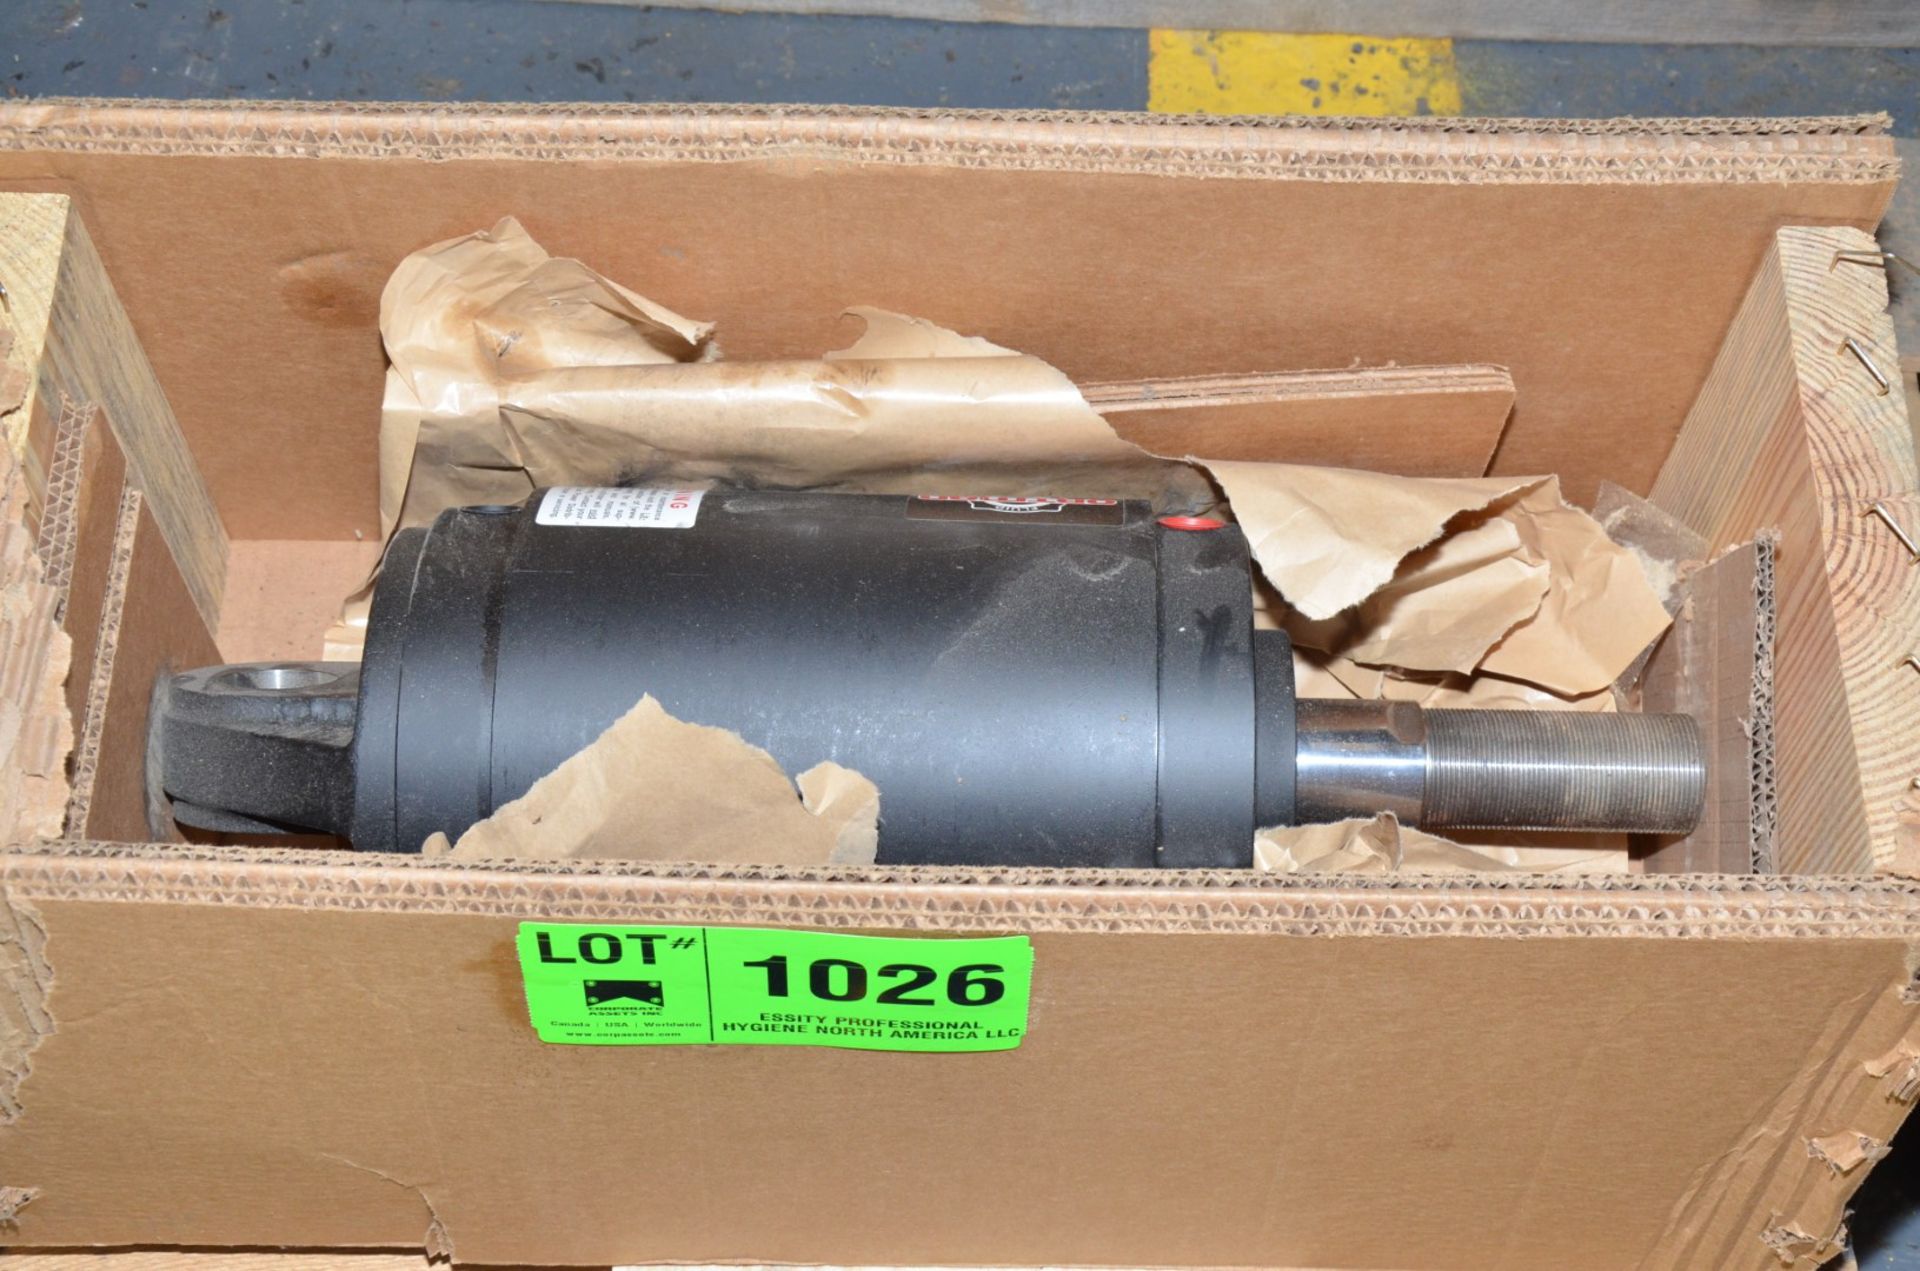 ORTMAN HYDRAULIC CYLINDER [RIGGING FEE FOR LOT #1026 - $25 USD PLUS APPLICABLE TAXES]